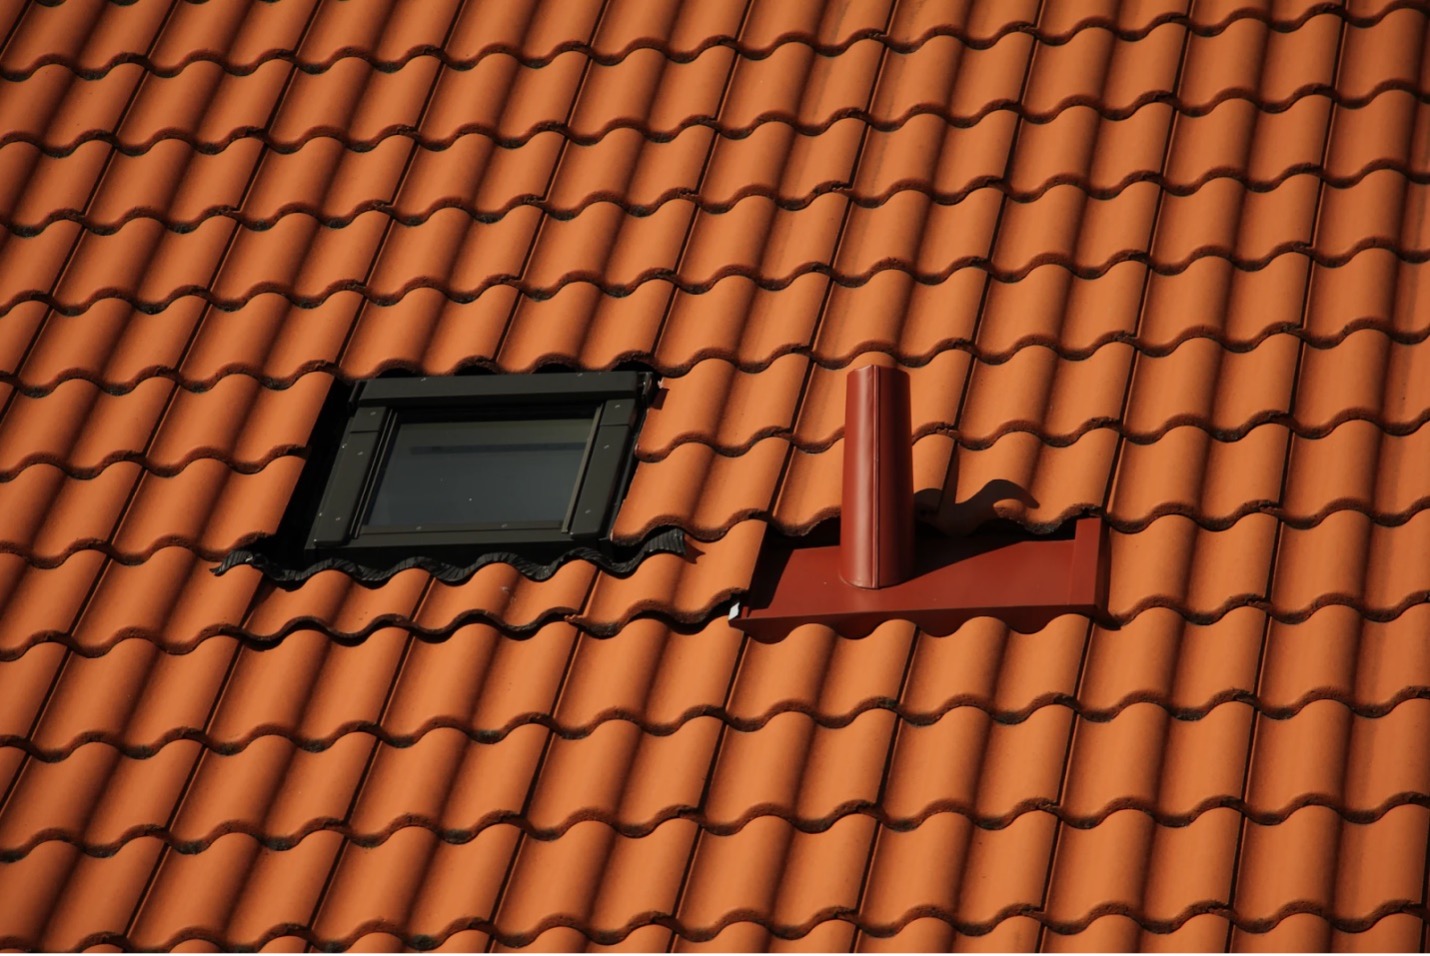 Composite Roofing Tiles